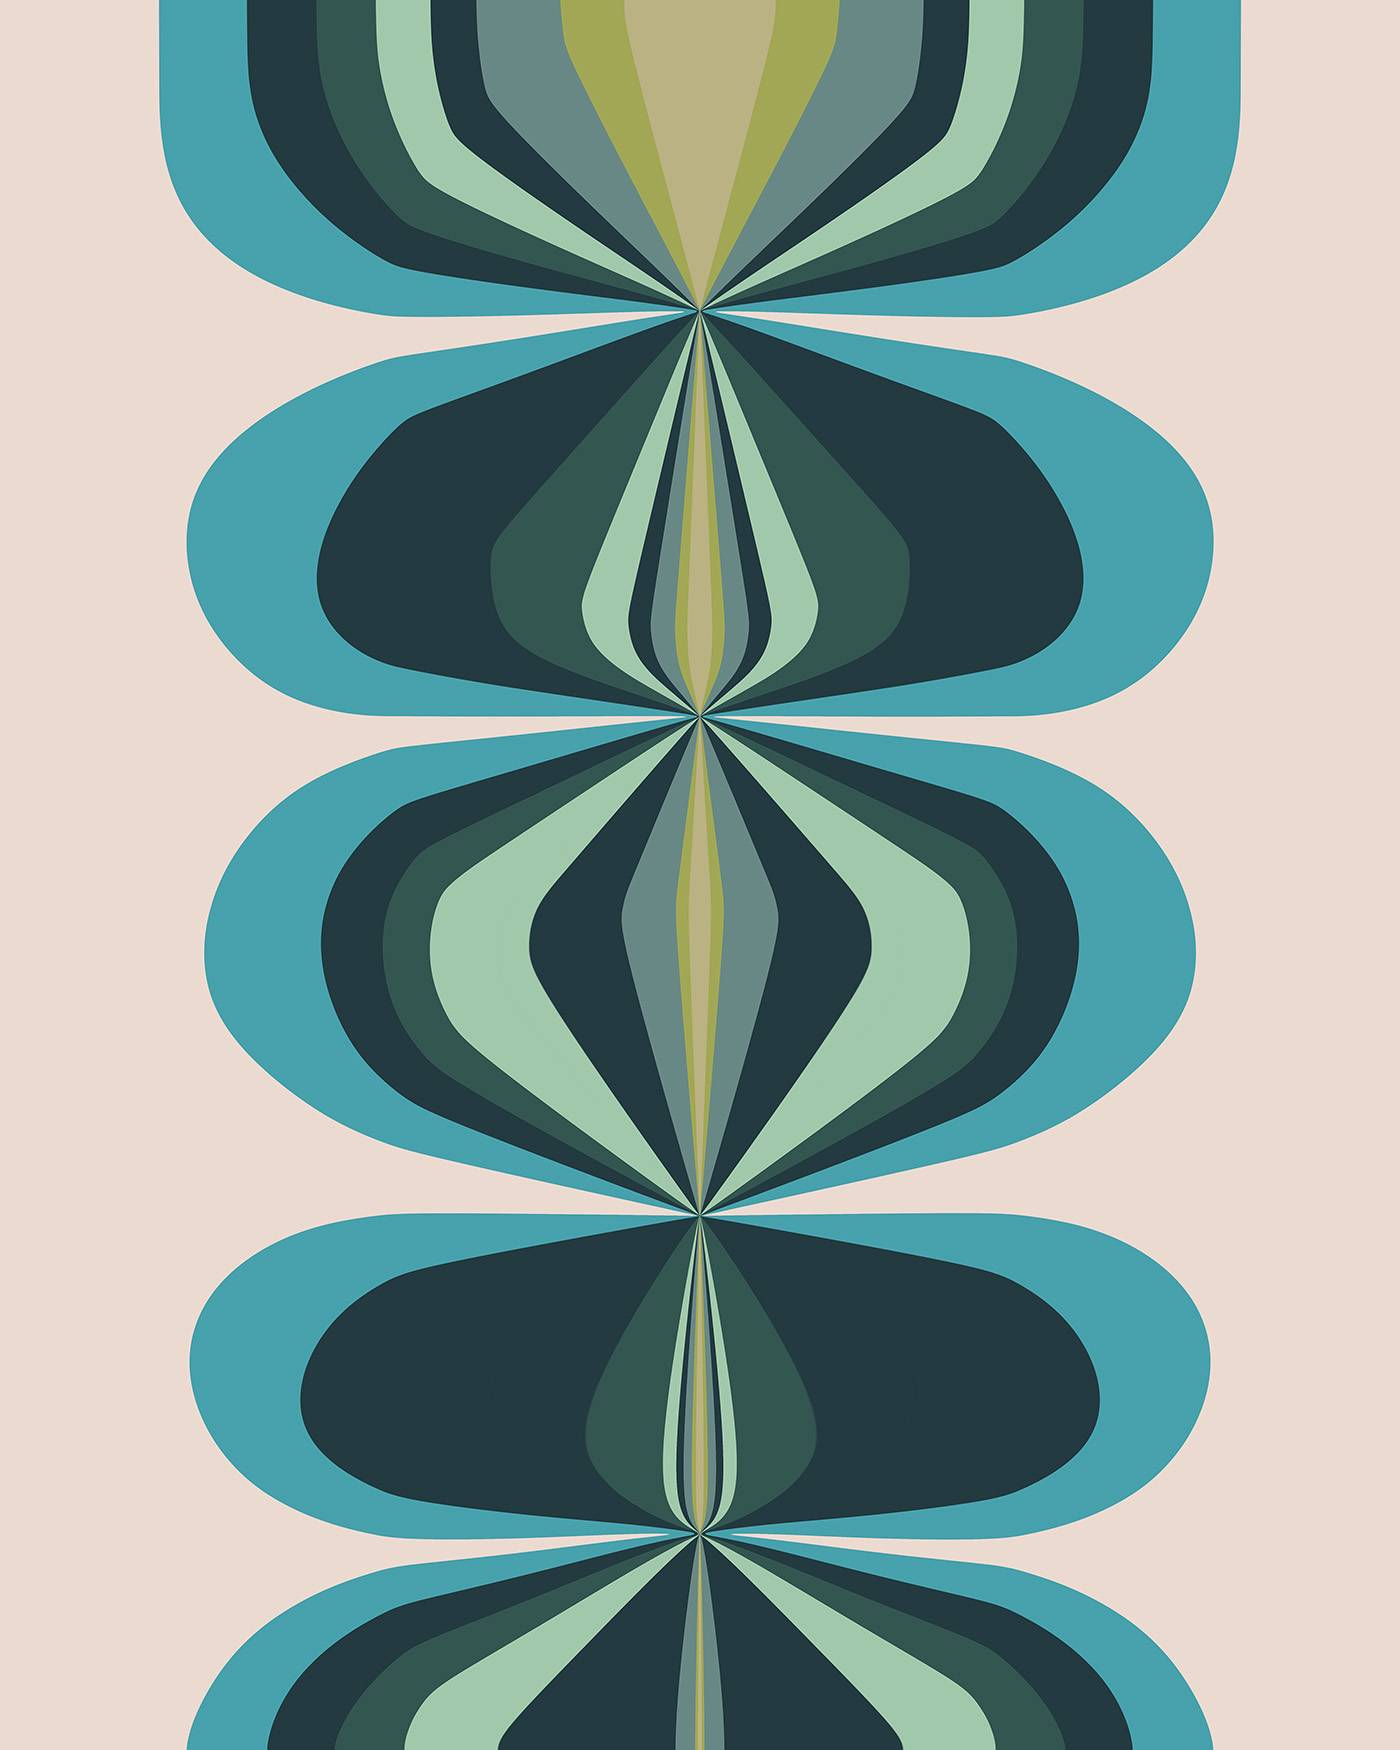 Mid-century inspired bold graphic design in shades of blue, green and turquoise